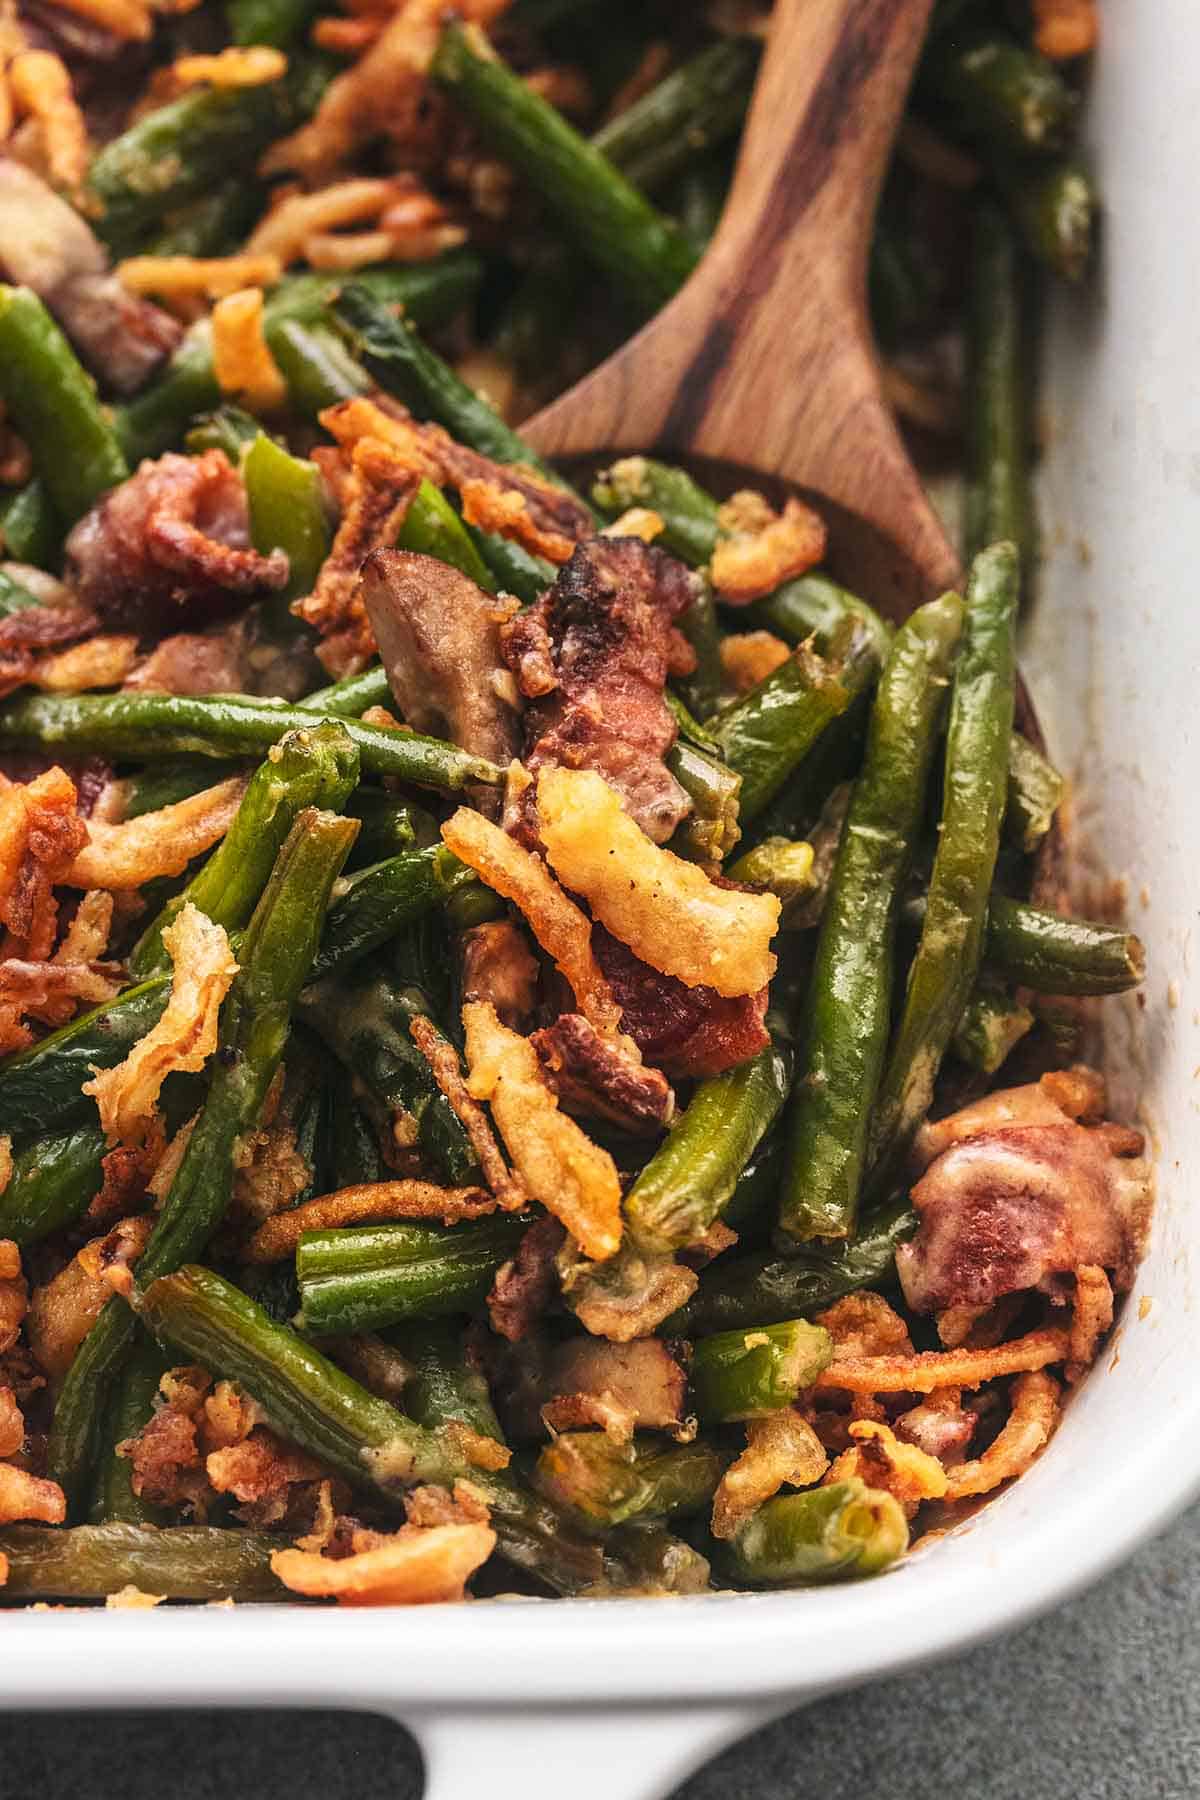 up close green beans with crispy bacon and onions with wooden serving spoon